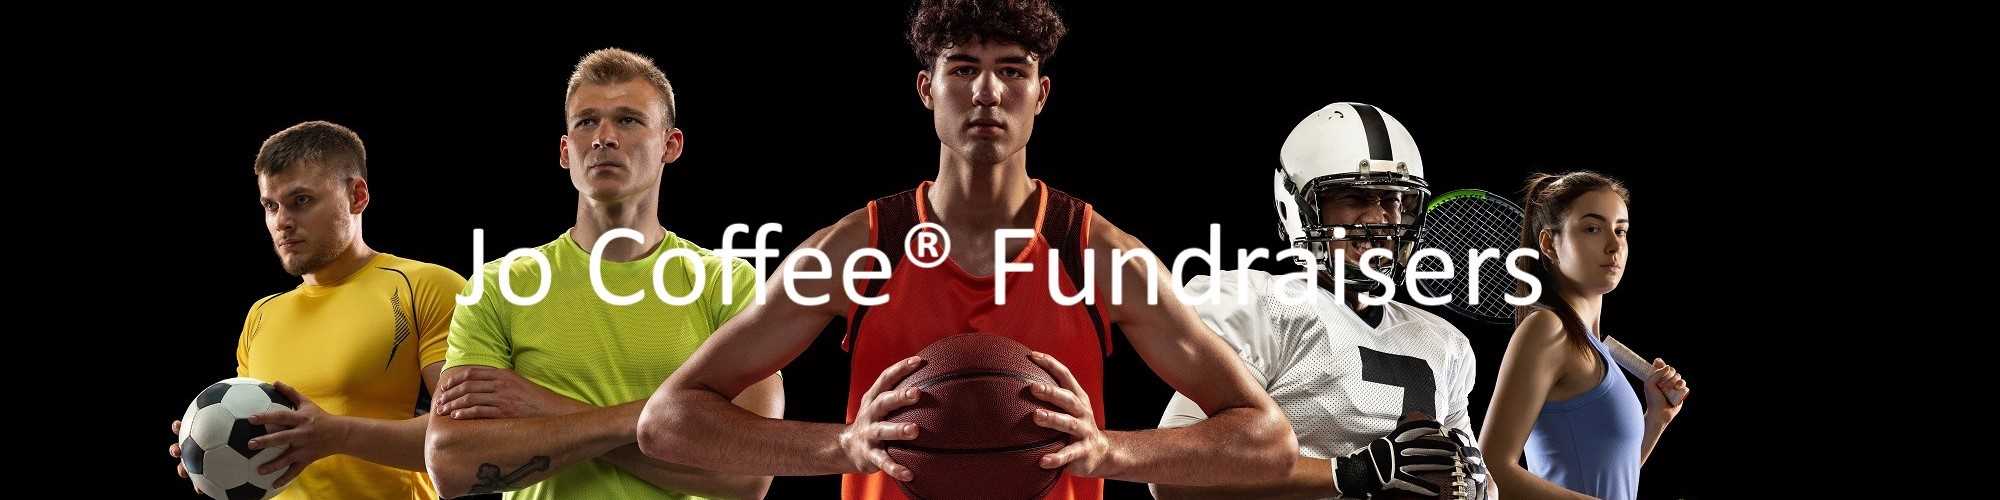 coffee fundraisers for schools